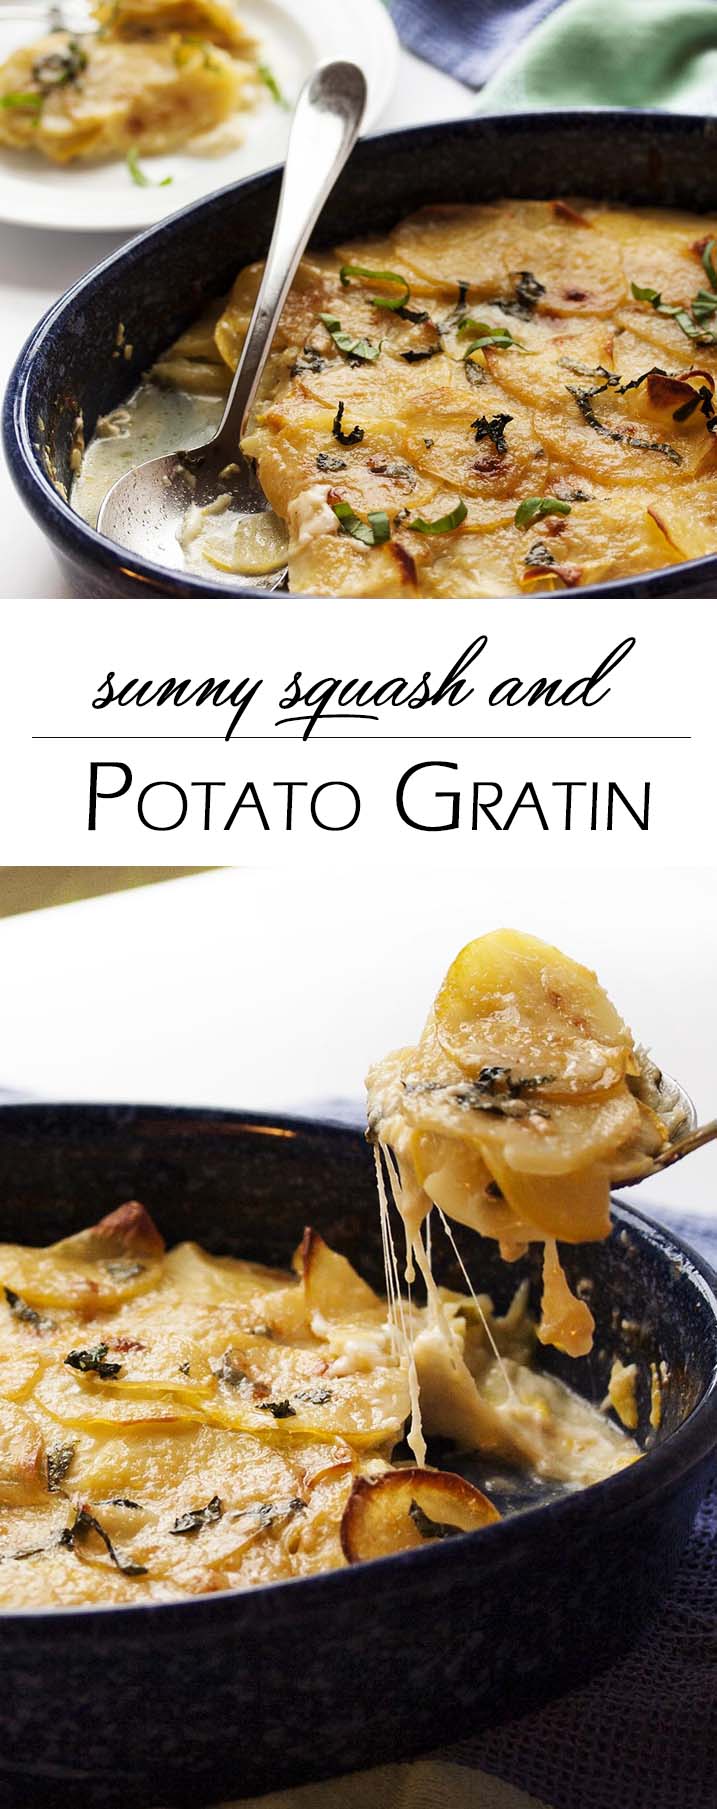 Sunny Yellow Squash and Potato Gratin - Yellow squash and yellow potatoes combine in this gratin to make one of my favorite easy side dishes. | justalittlebitofbacon.com